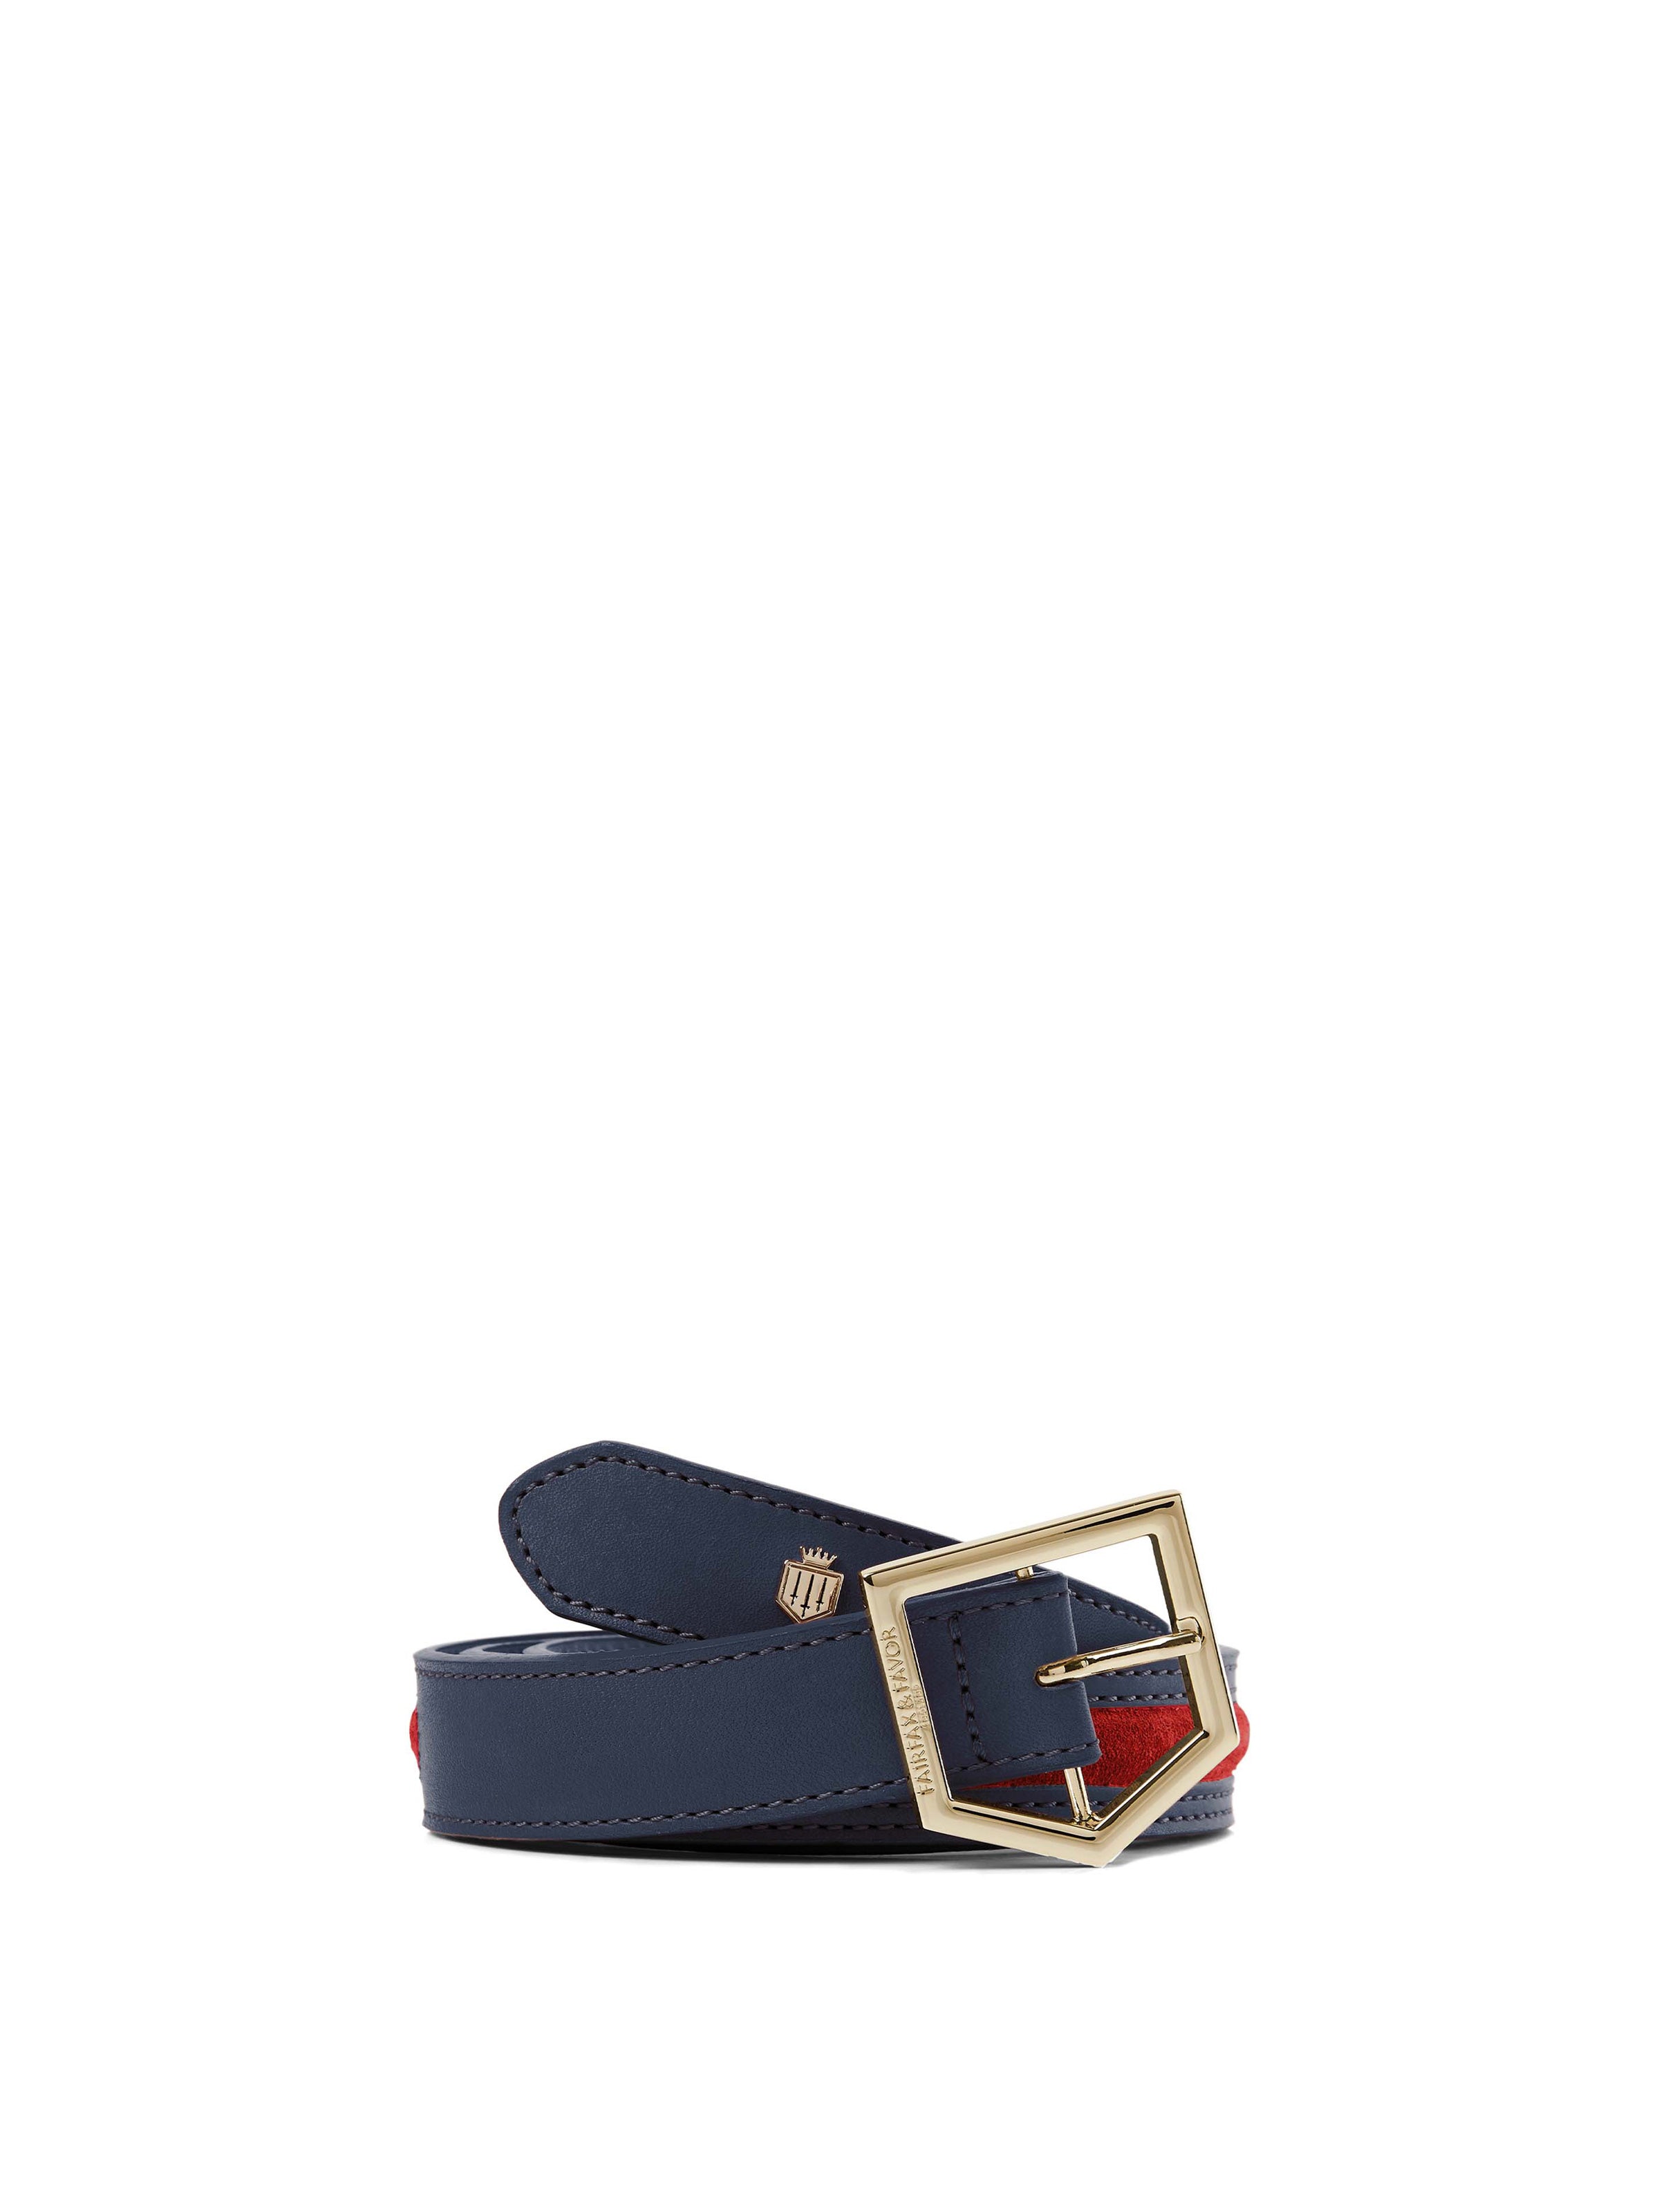 Over Under Clothing The Patriotic Ribbon Belt in Navy – Country